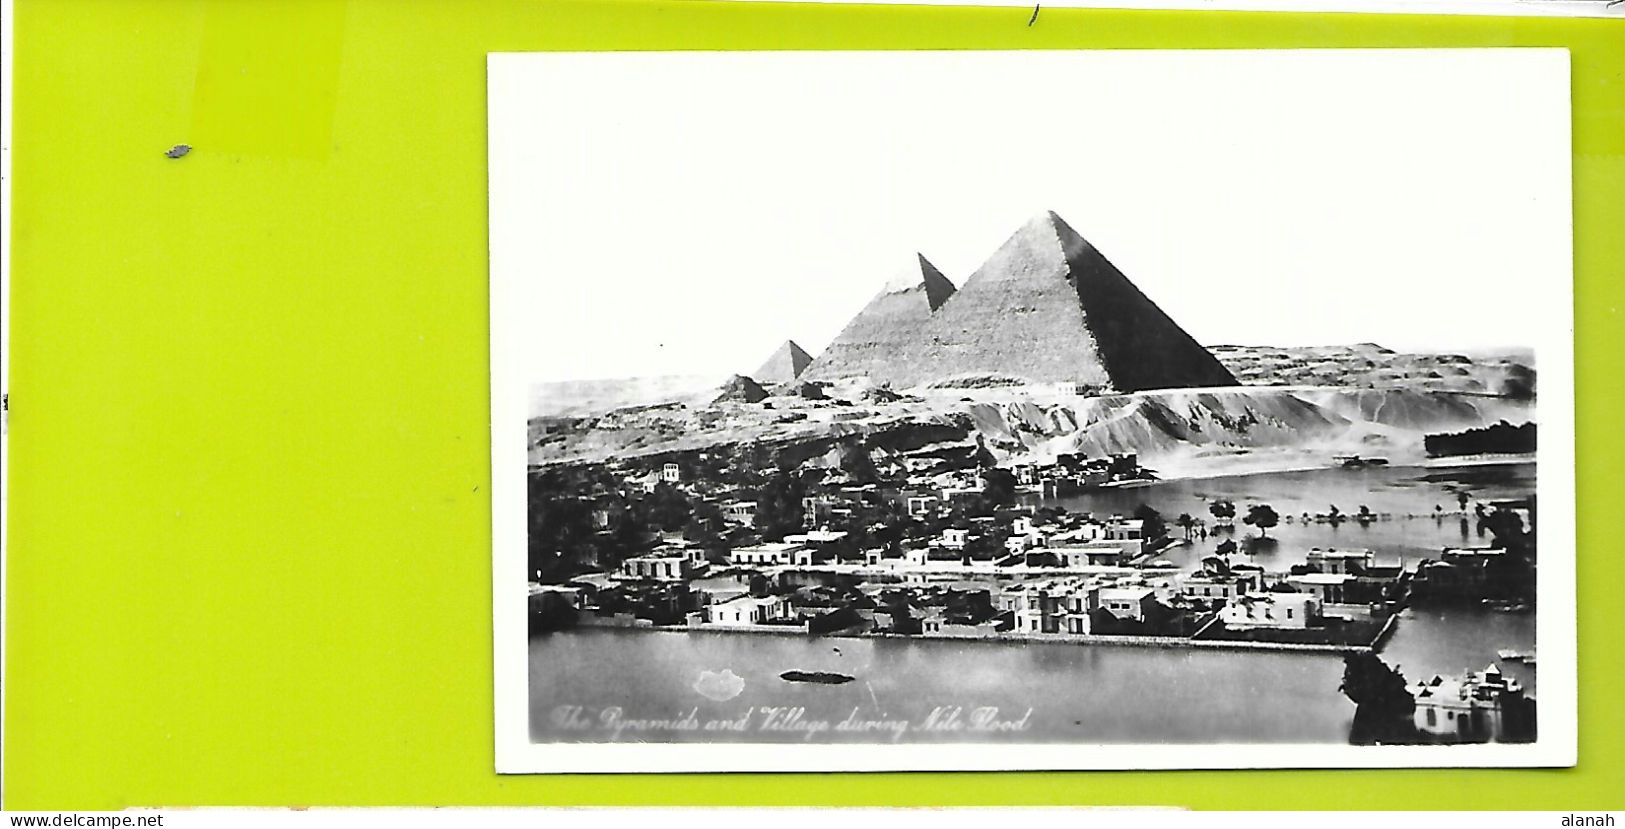 The Pyramids And Village During Nile Flood Egypte - Pyramids